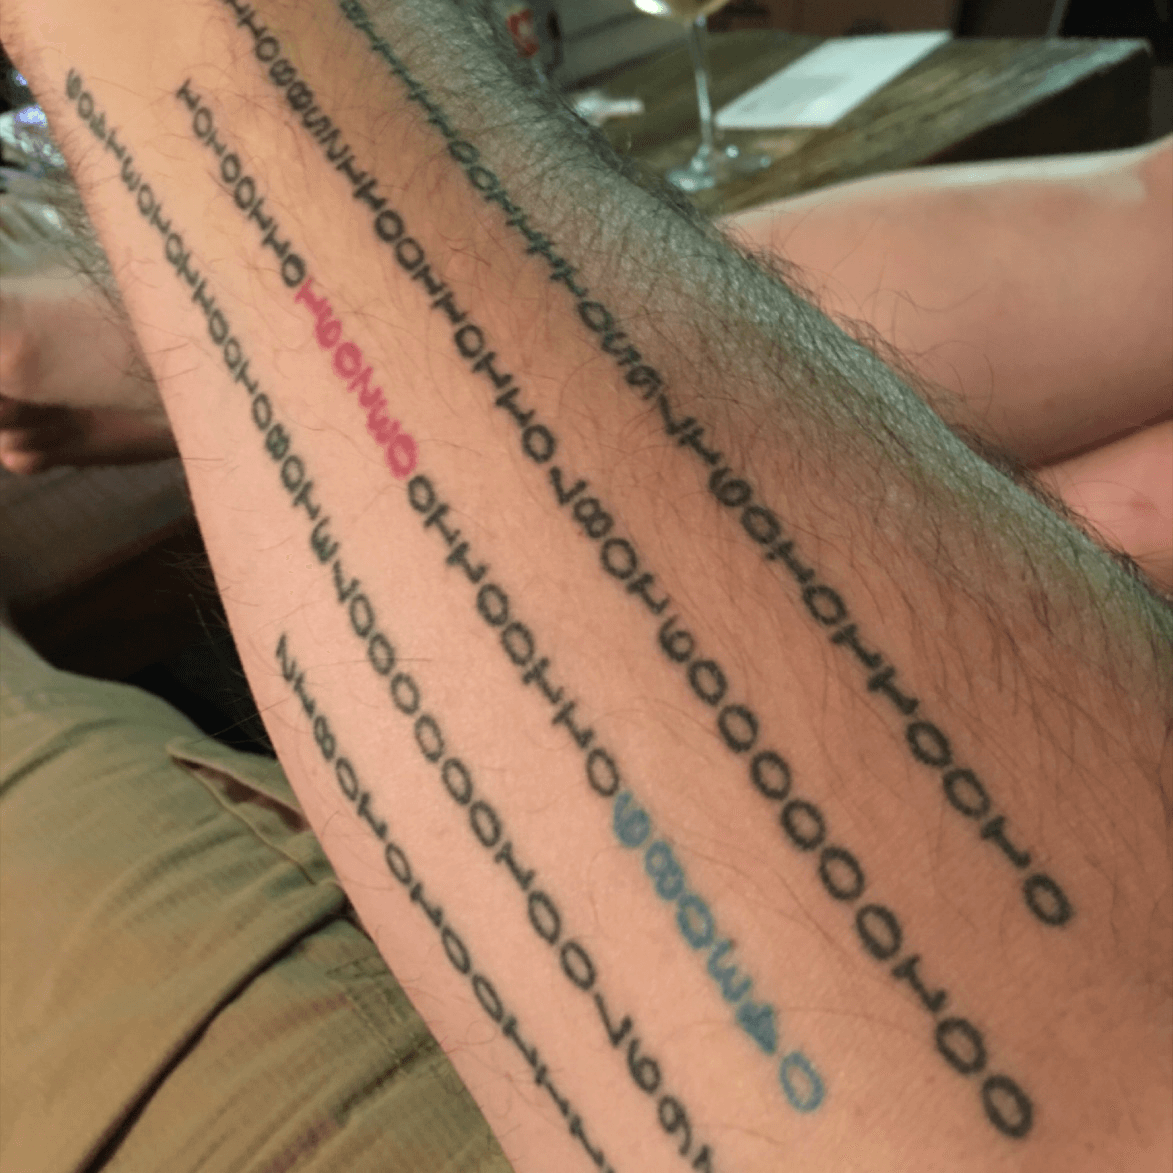 30 Binary Tattoo Designs For Men  Coded Ink Ideas  Tattoo designs men  Arm tattoos for guys Forearm band tattoos